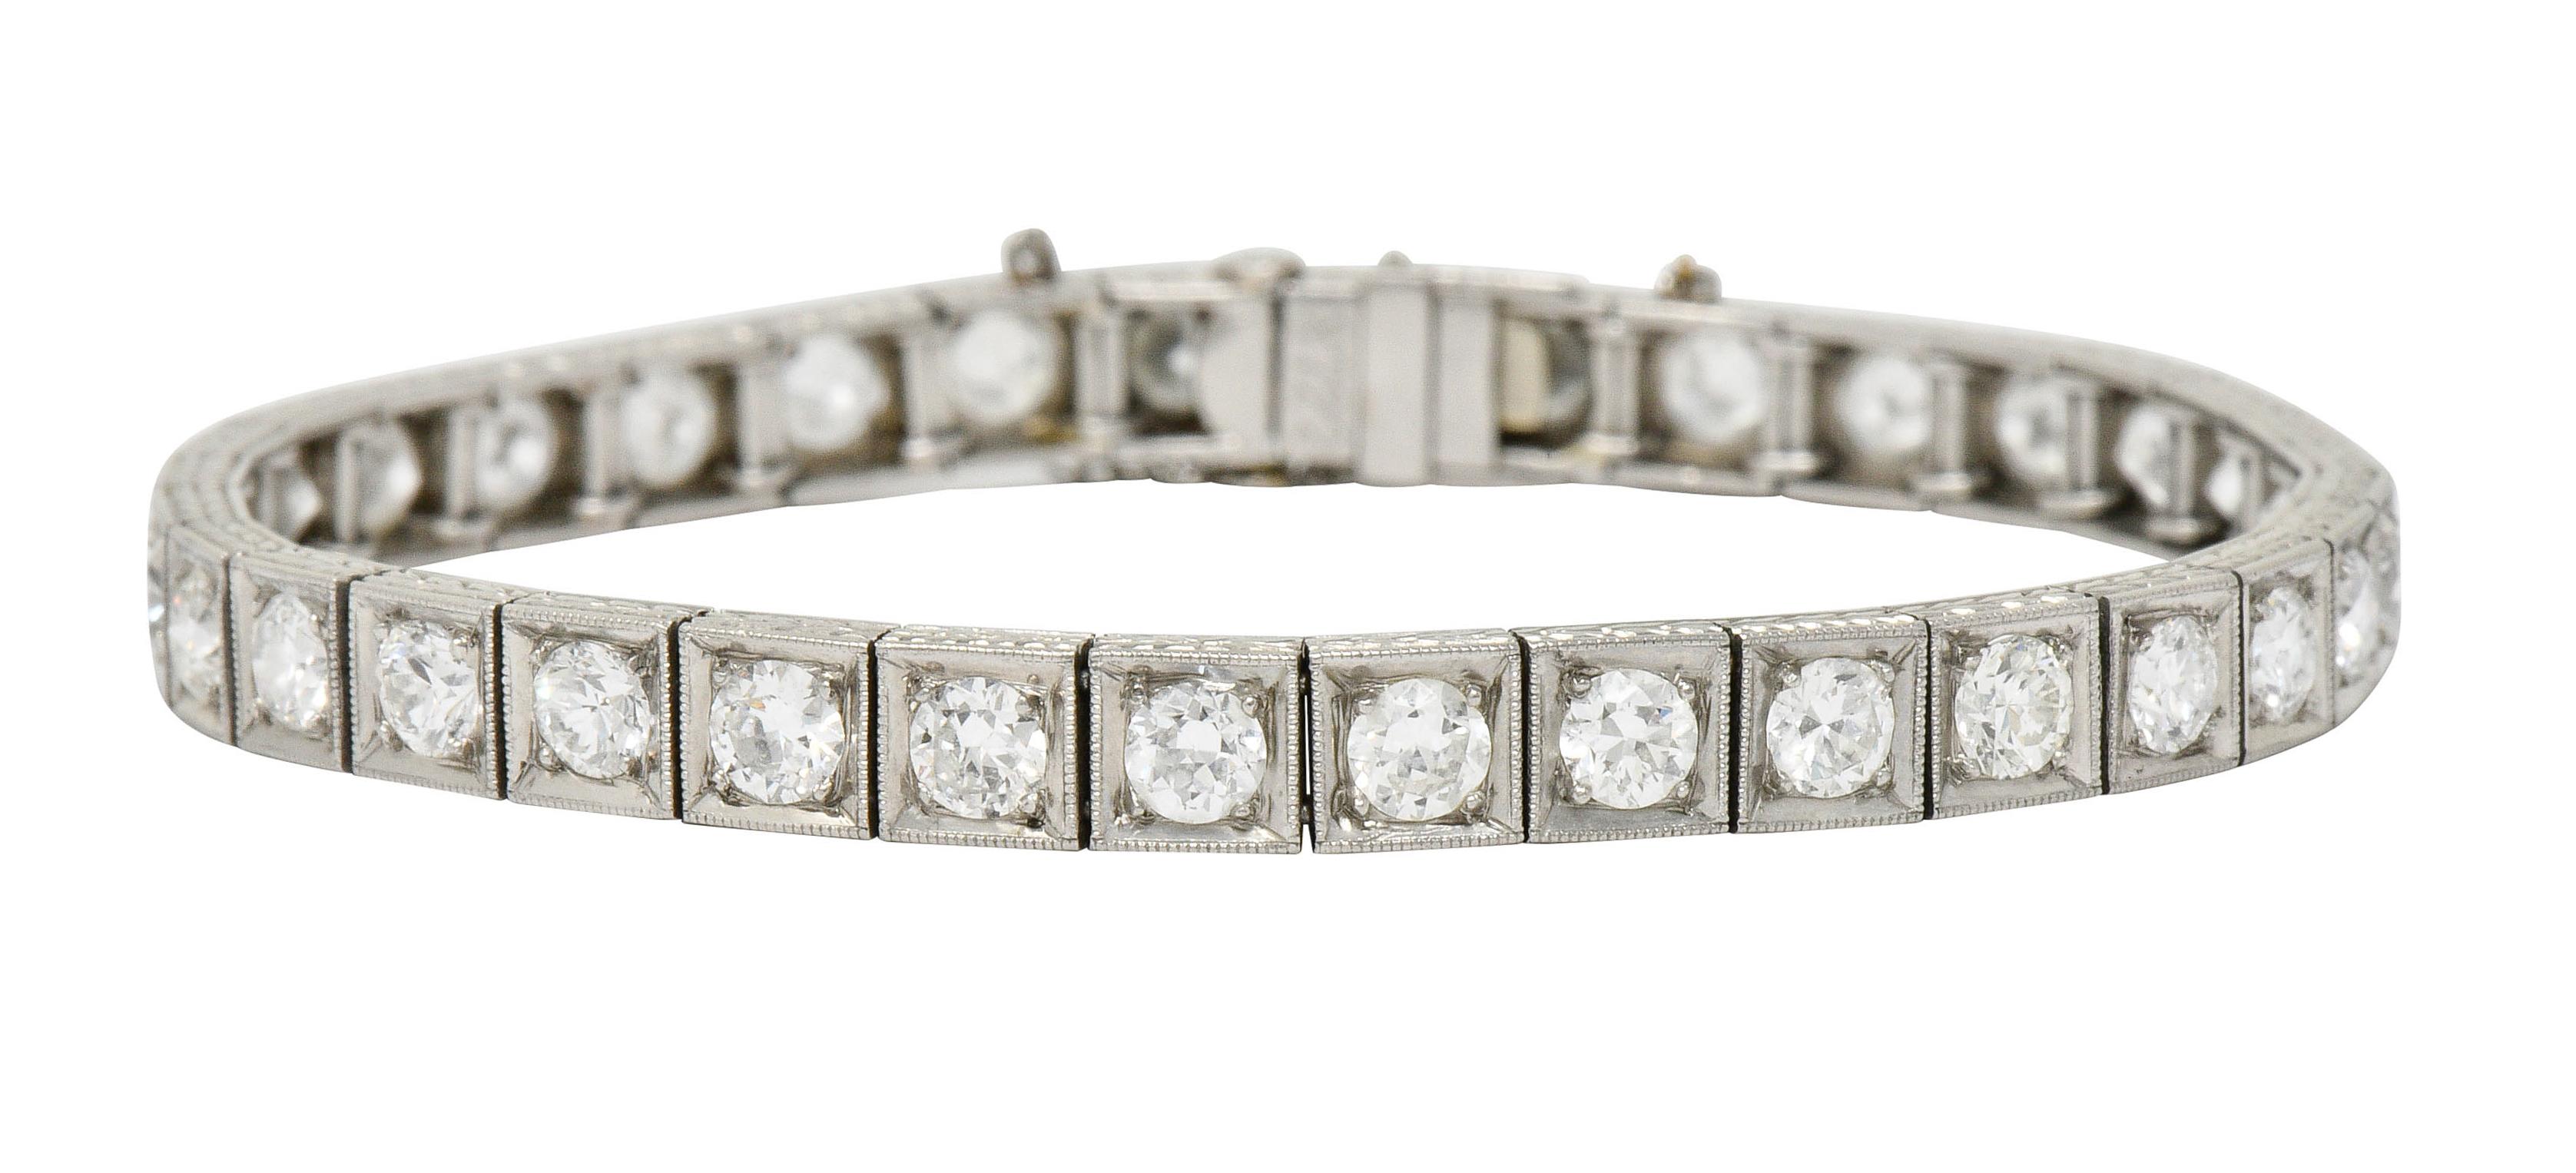 Line bracelet is comprised of square form links with a delicate milgrain edge

Set with transitional cut diamonds weighing in total approximately 5.90 carats; H to J color with VS clarity

Profile edge is deeply engraved with a stylized wheat